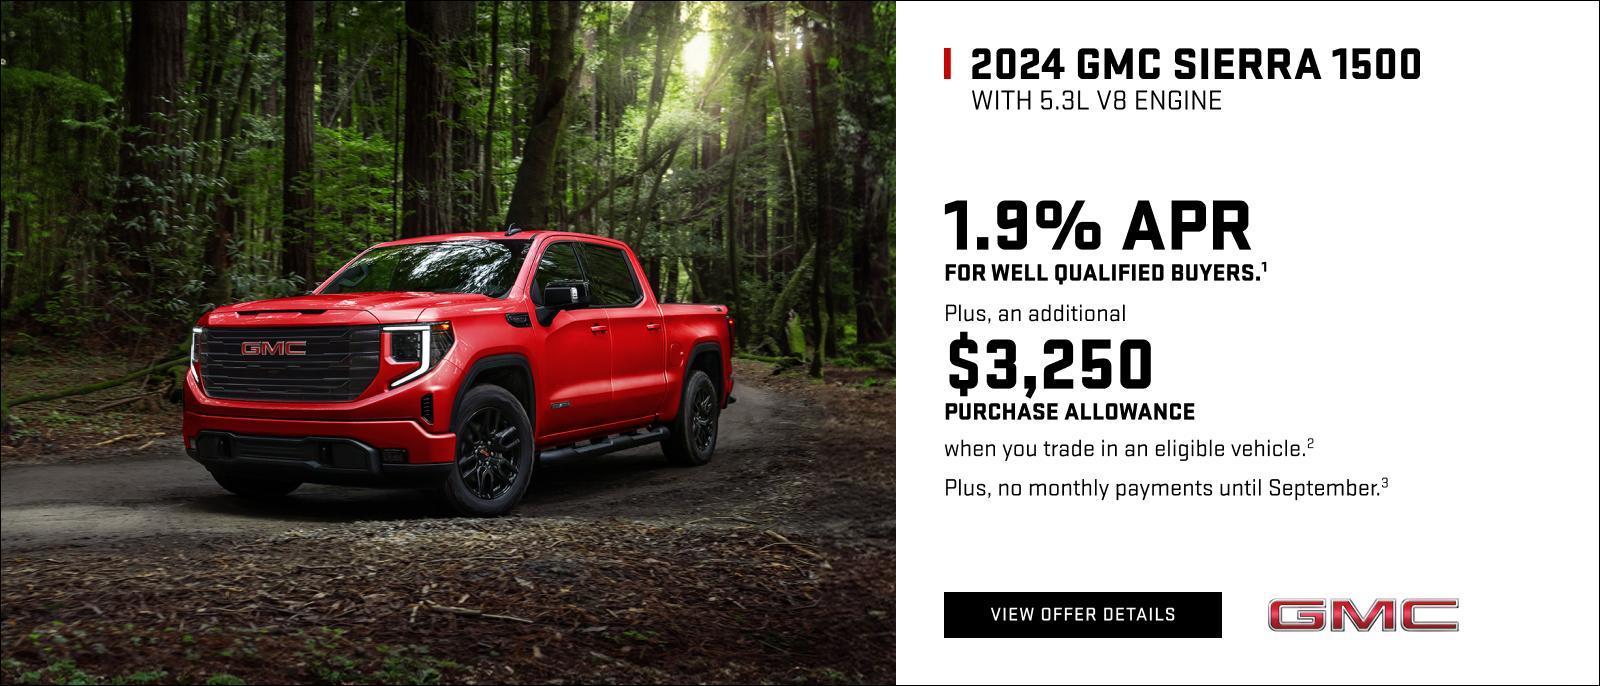 1.9% APR for well-qualified buyers.1

Plus, an additional $3,250 PURCHASE ALLOWANCE when you trade in an eligible vehicle.2

Plus, no monthly payments until September. 3